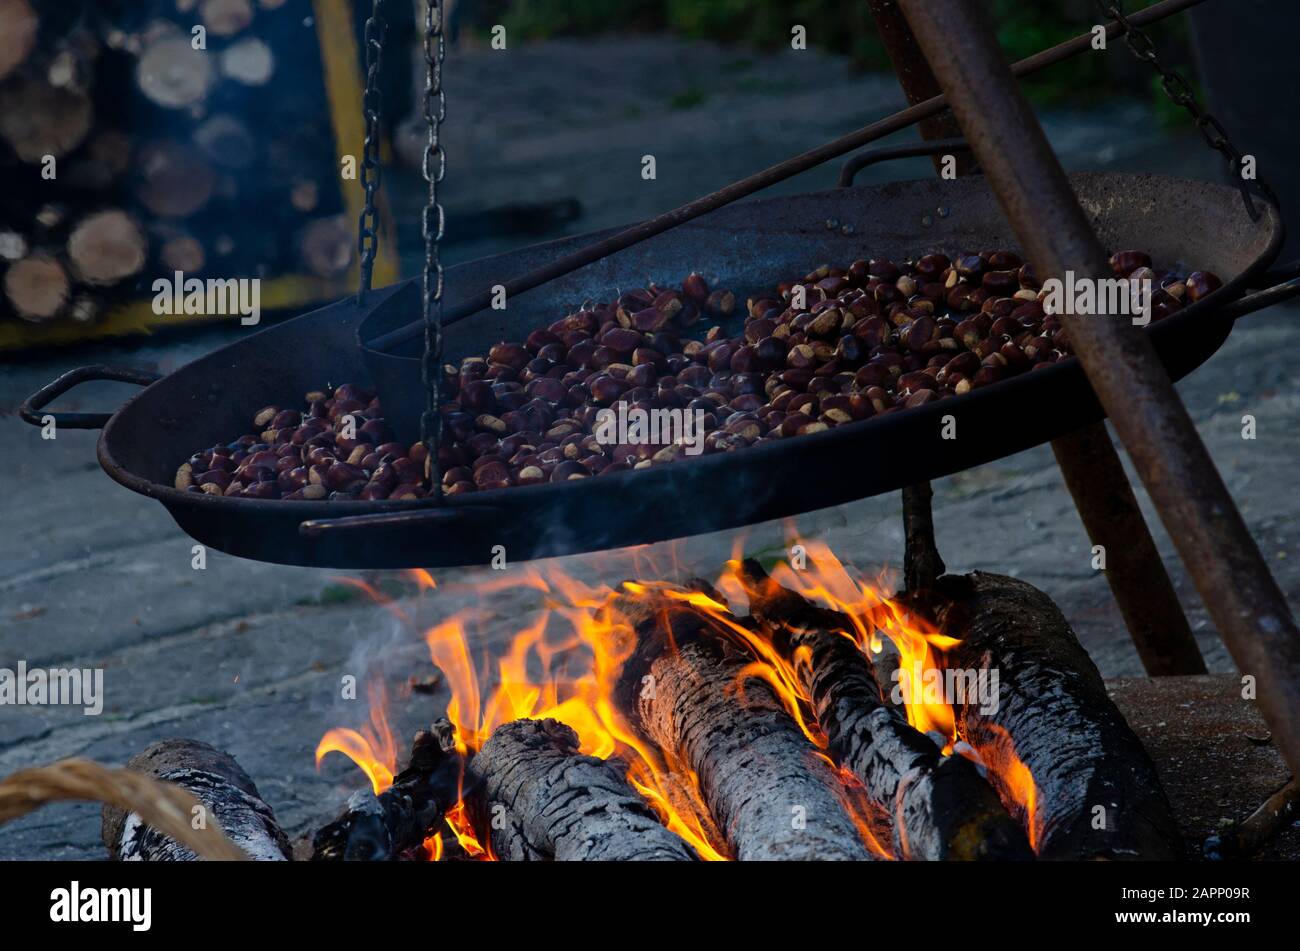 Roasting Chestnuts On An Open Fire In The Tuscan Mountain Village Of Gavinana During The October Festival Celebrating The Chestnut Harvest Stock Photo Alamy,Soy Cheesecake